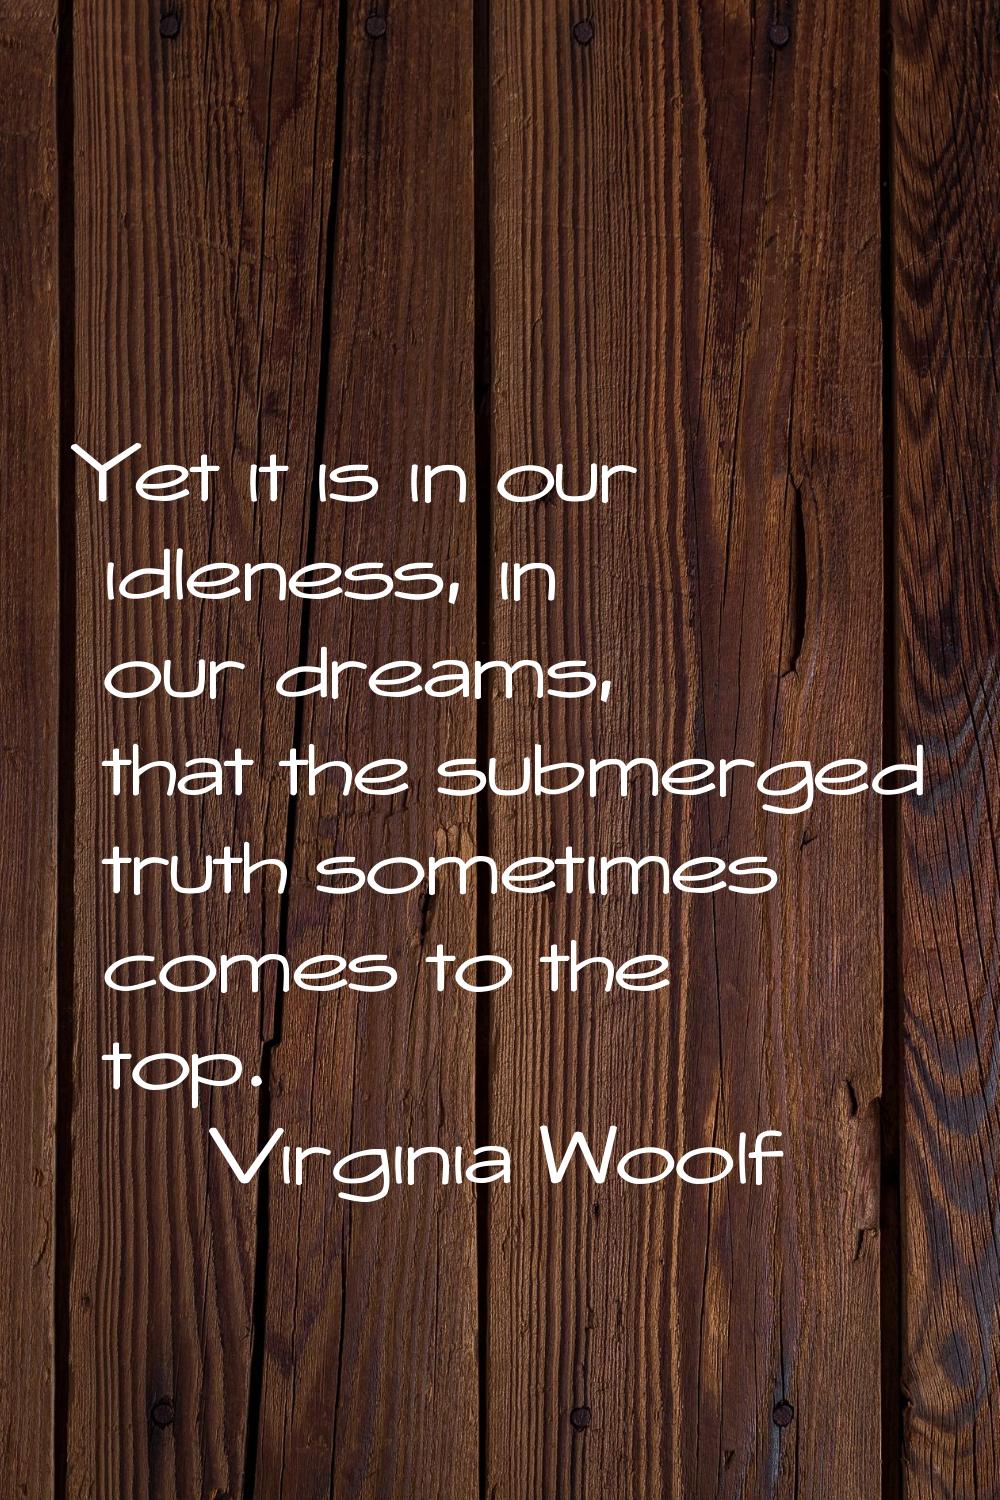 Yet it is in our idleness, in our dreams, that the submerged truth sometimes comes to the top.